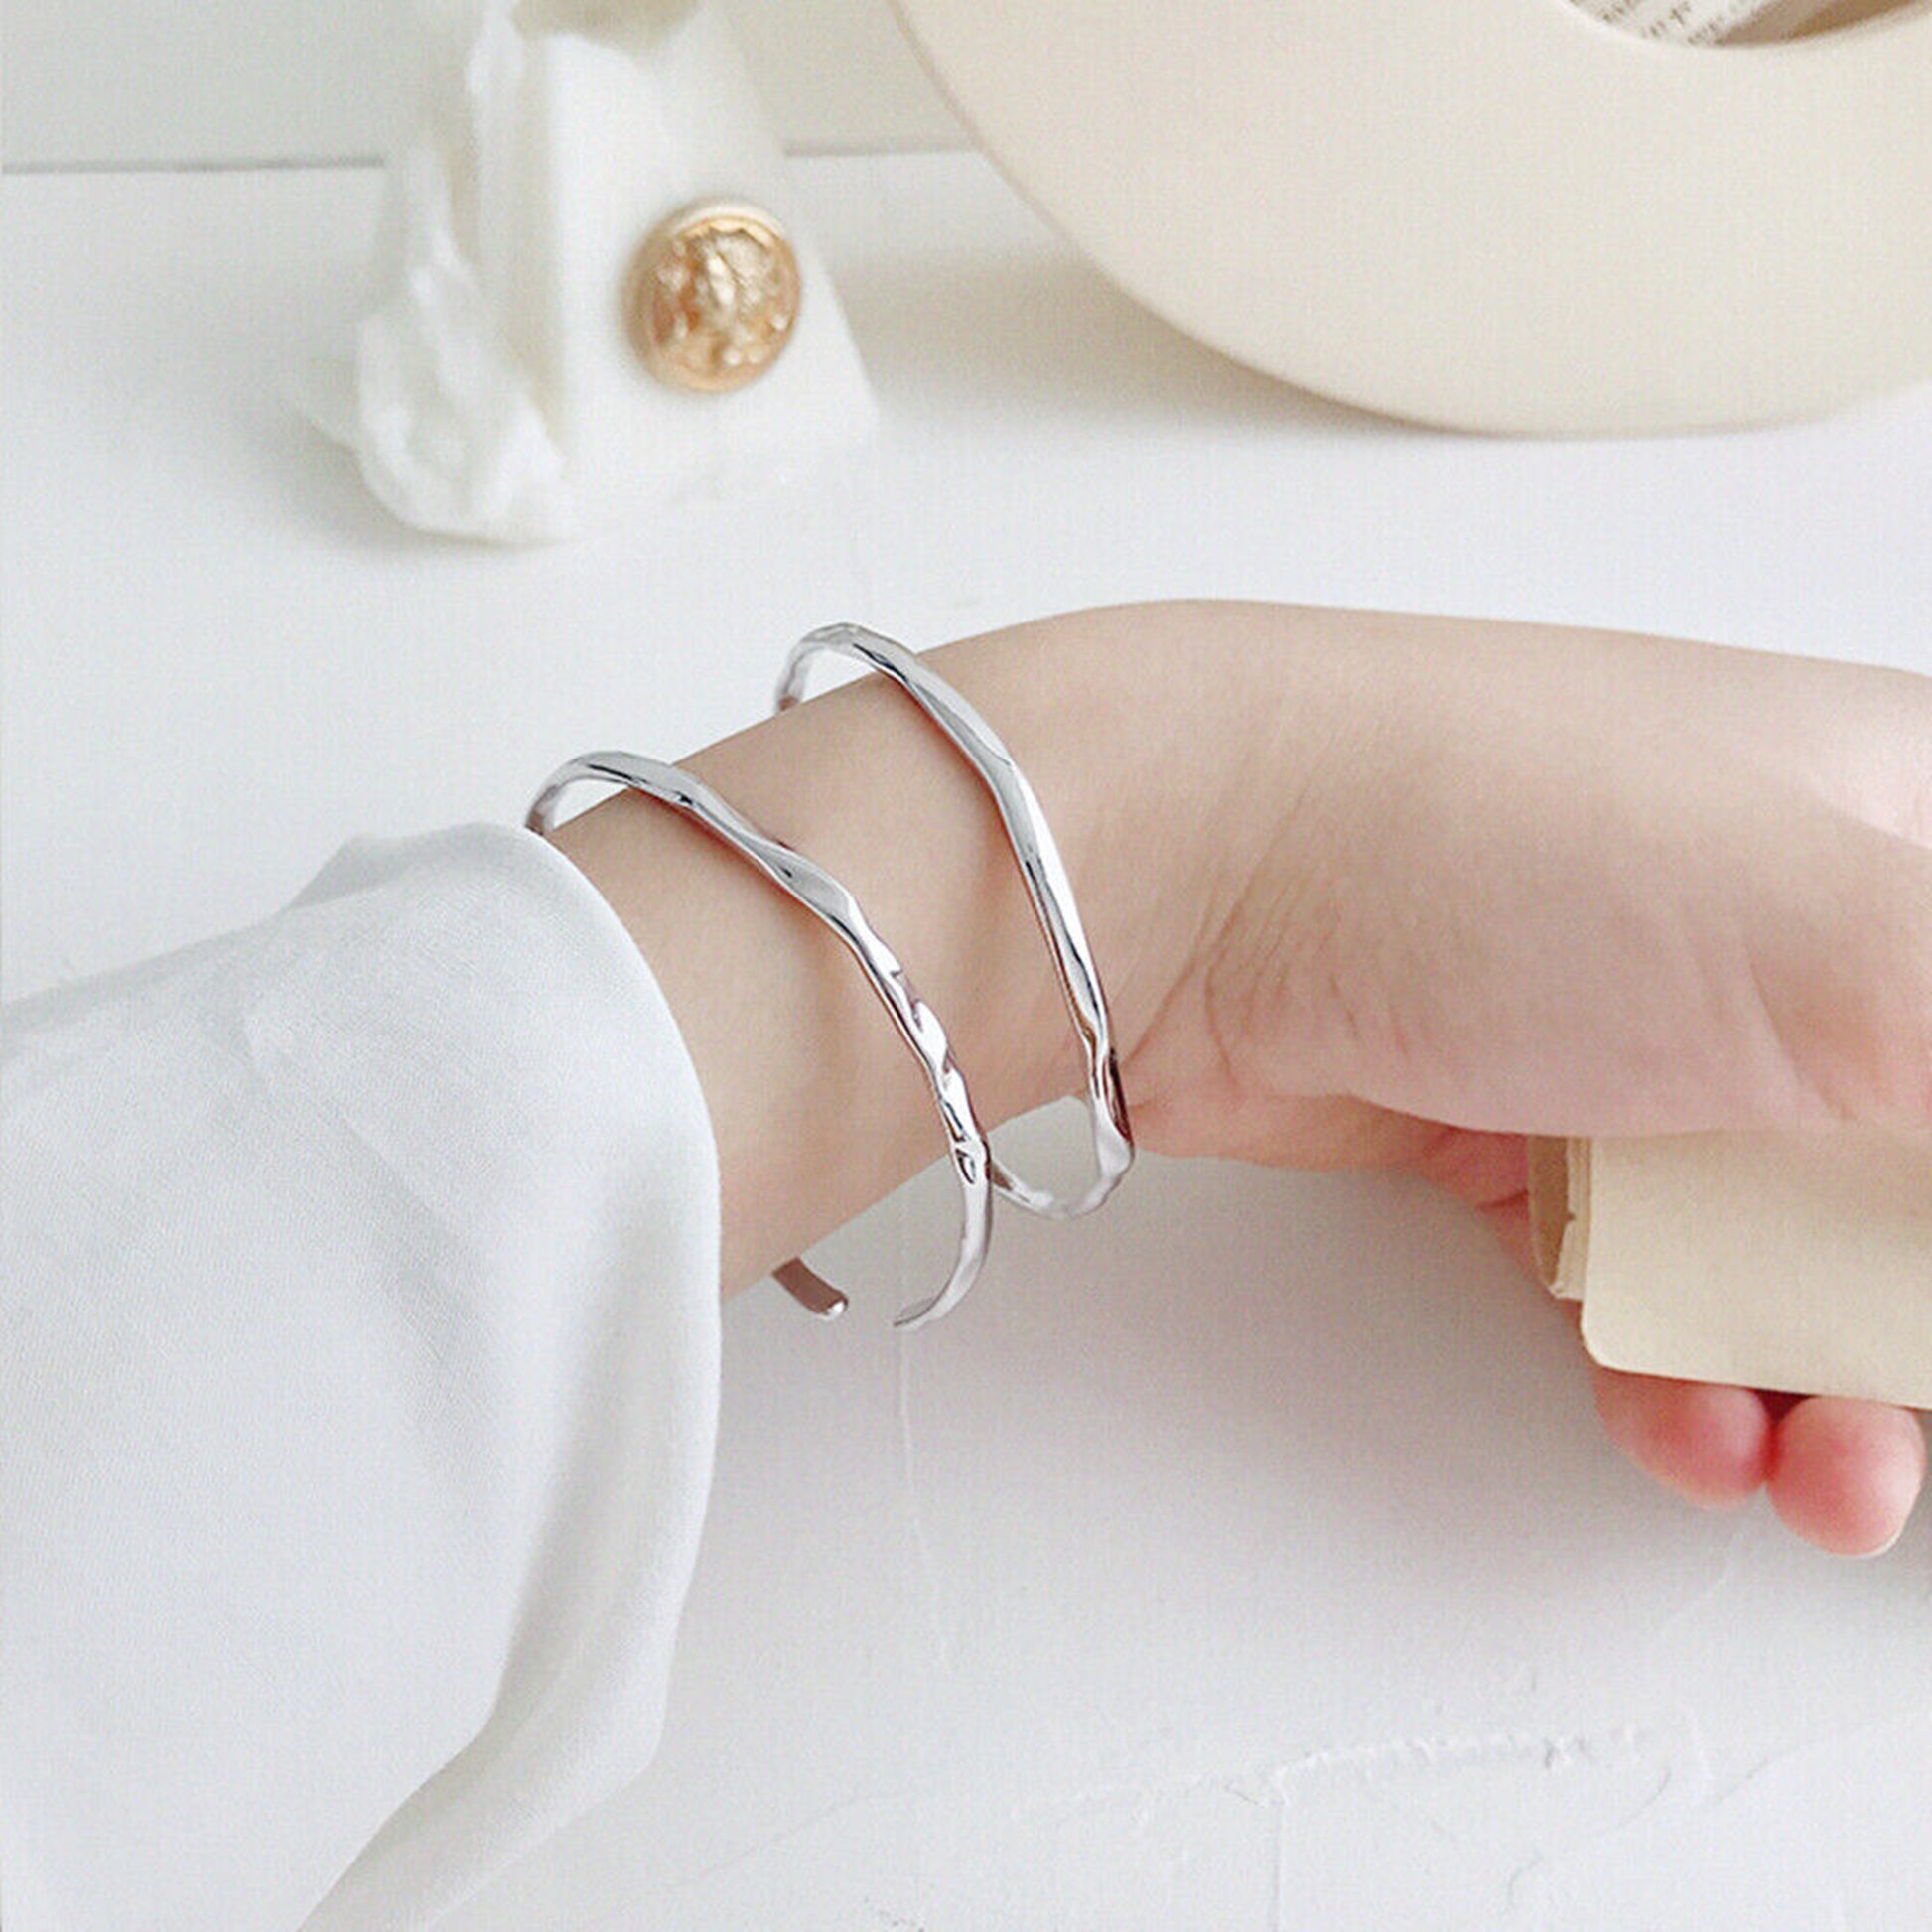 Sterling Silver Solid Polished Hammered Cuff Bangle Bracelet 55mm 7.5g Boxed - sugarkittenlondon